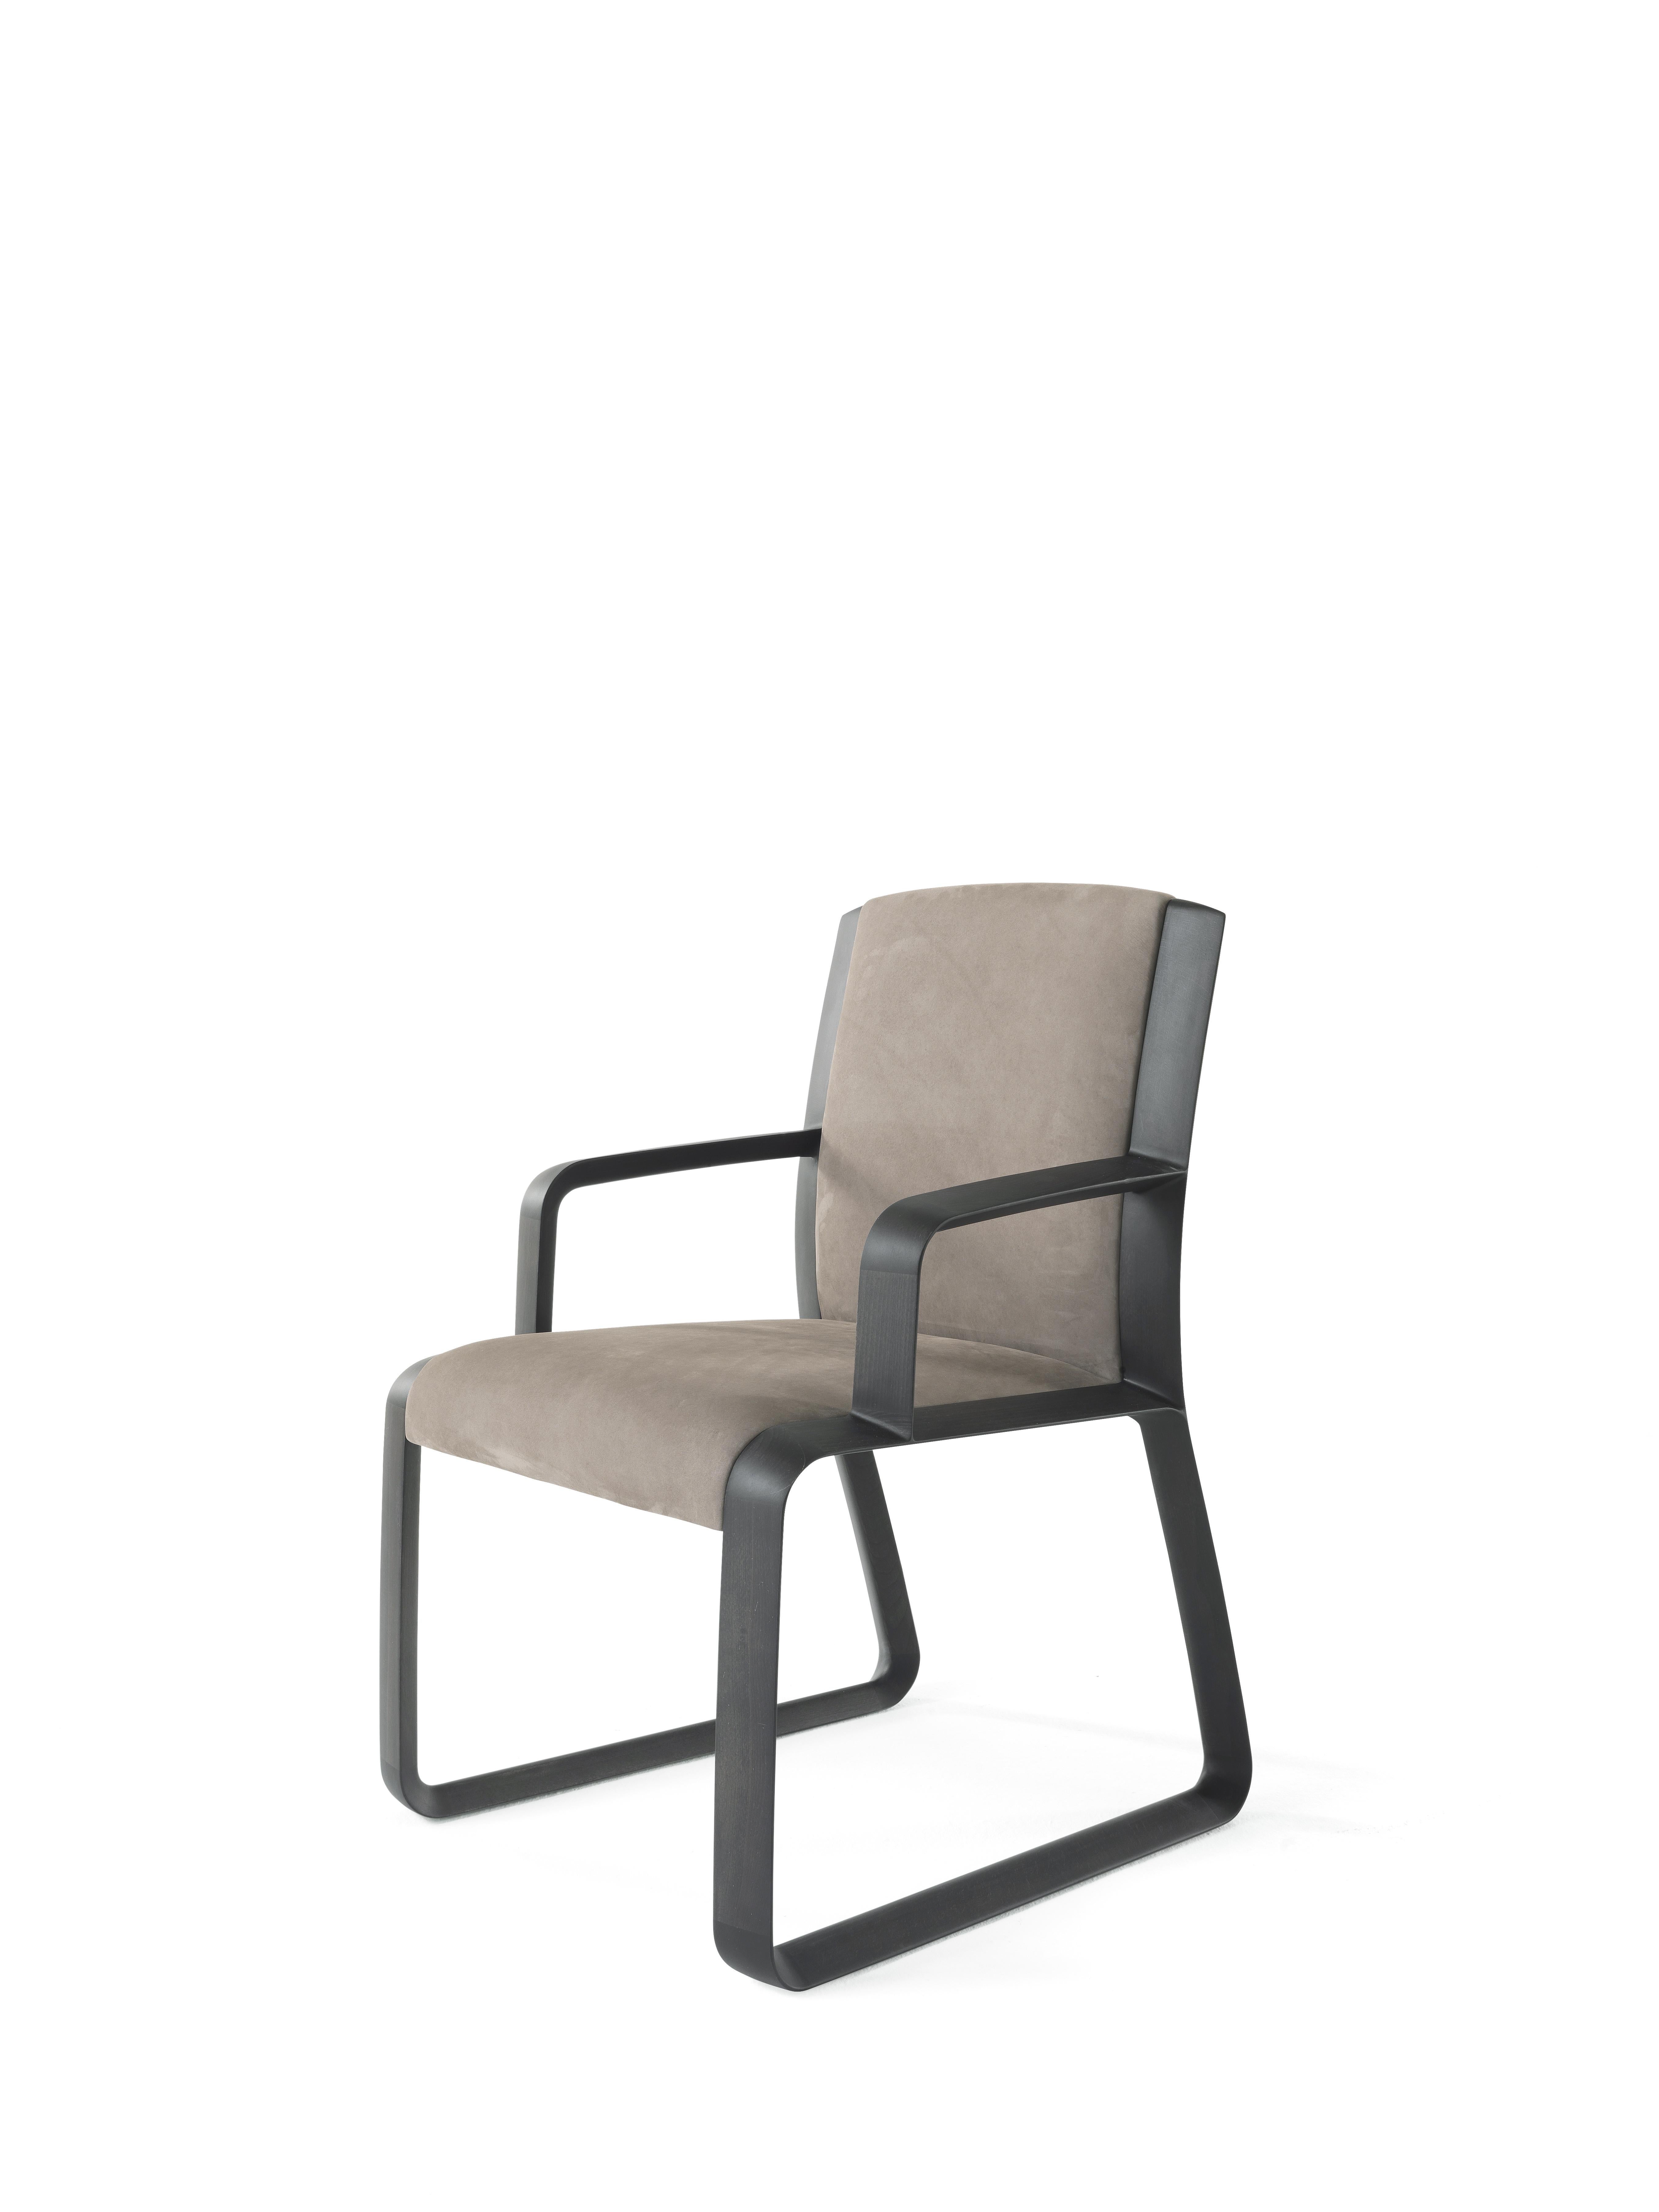 A minimalist aesthetic and a comfortable seat are emphasized by the sensual nubuck upholstery for the Wynwood chair. Height, size and design are studied to complement refined but sober desks or dining tables.
Wynwood Chair with armrests with